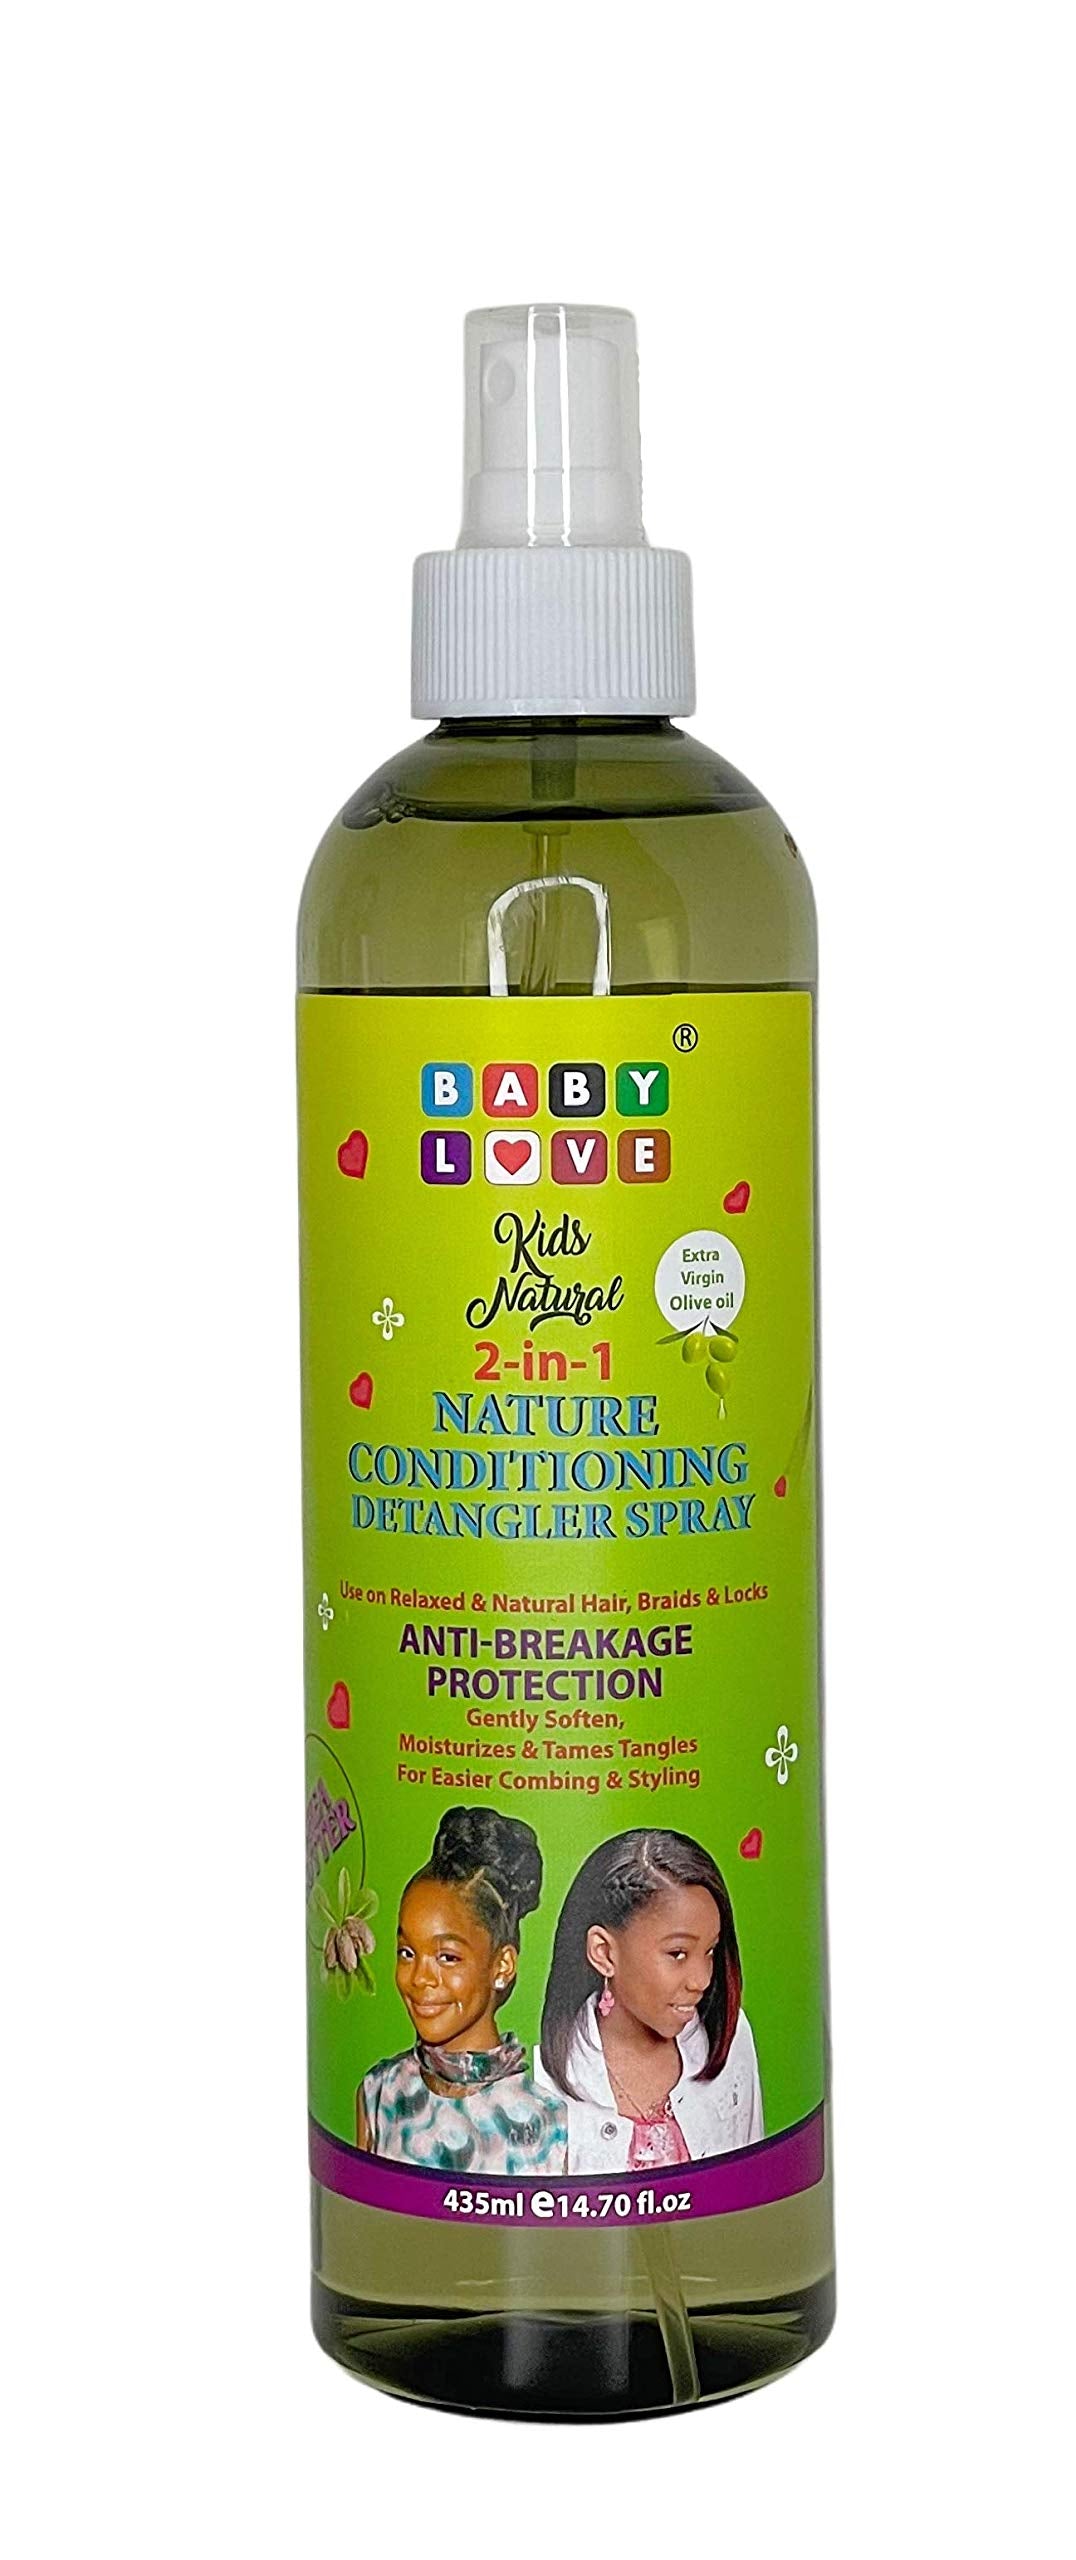 BABY LOVE KIDS NATURAL 2-IN-1 SHEA BUTTER CONDITIONING DETANGLING SPRAY 435ML